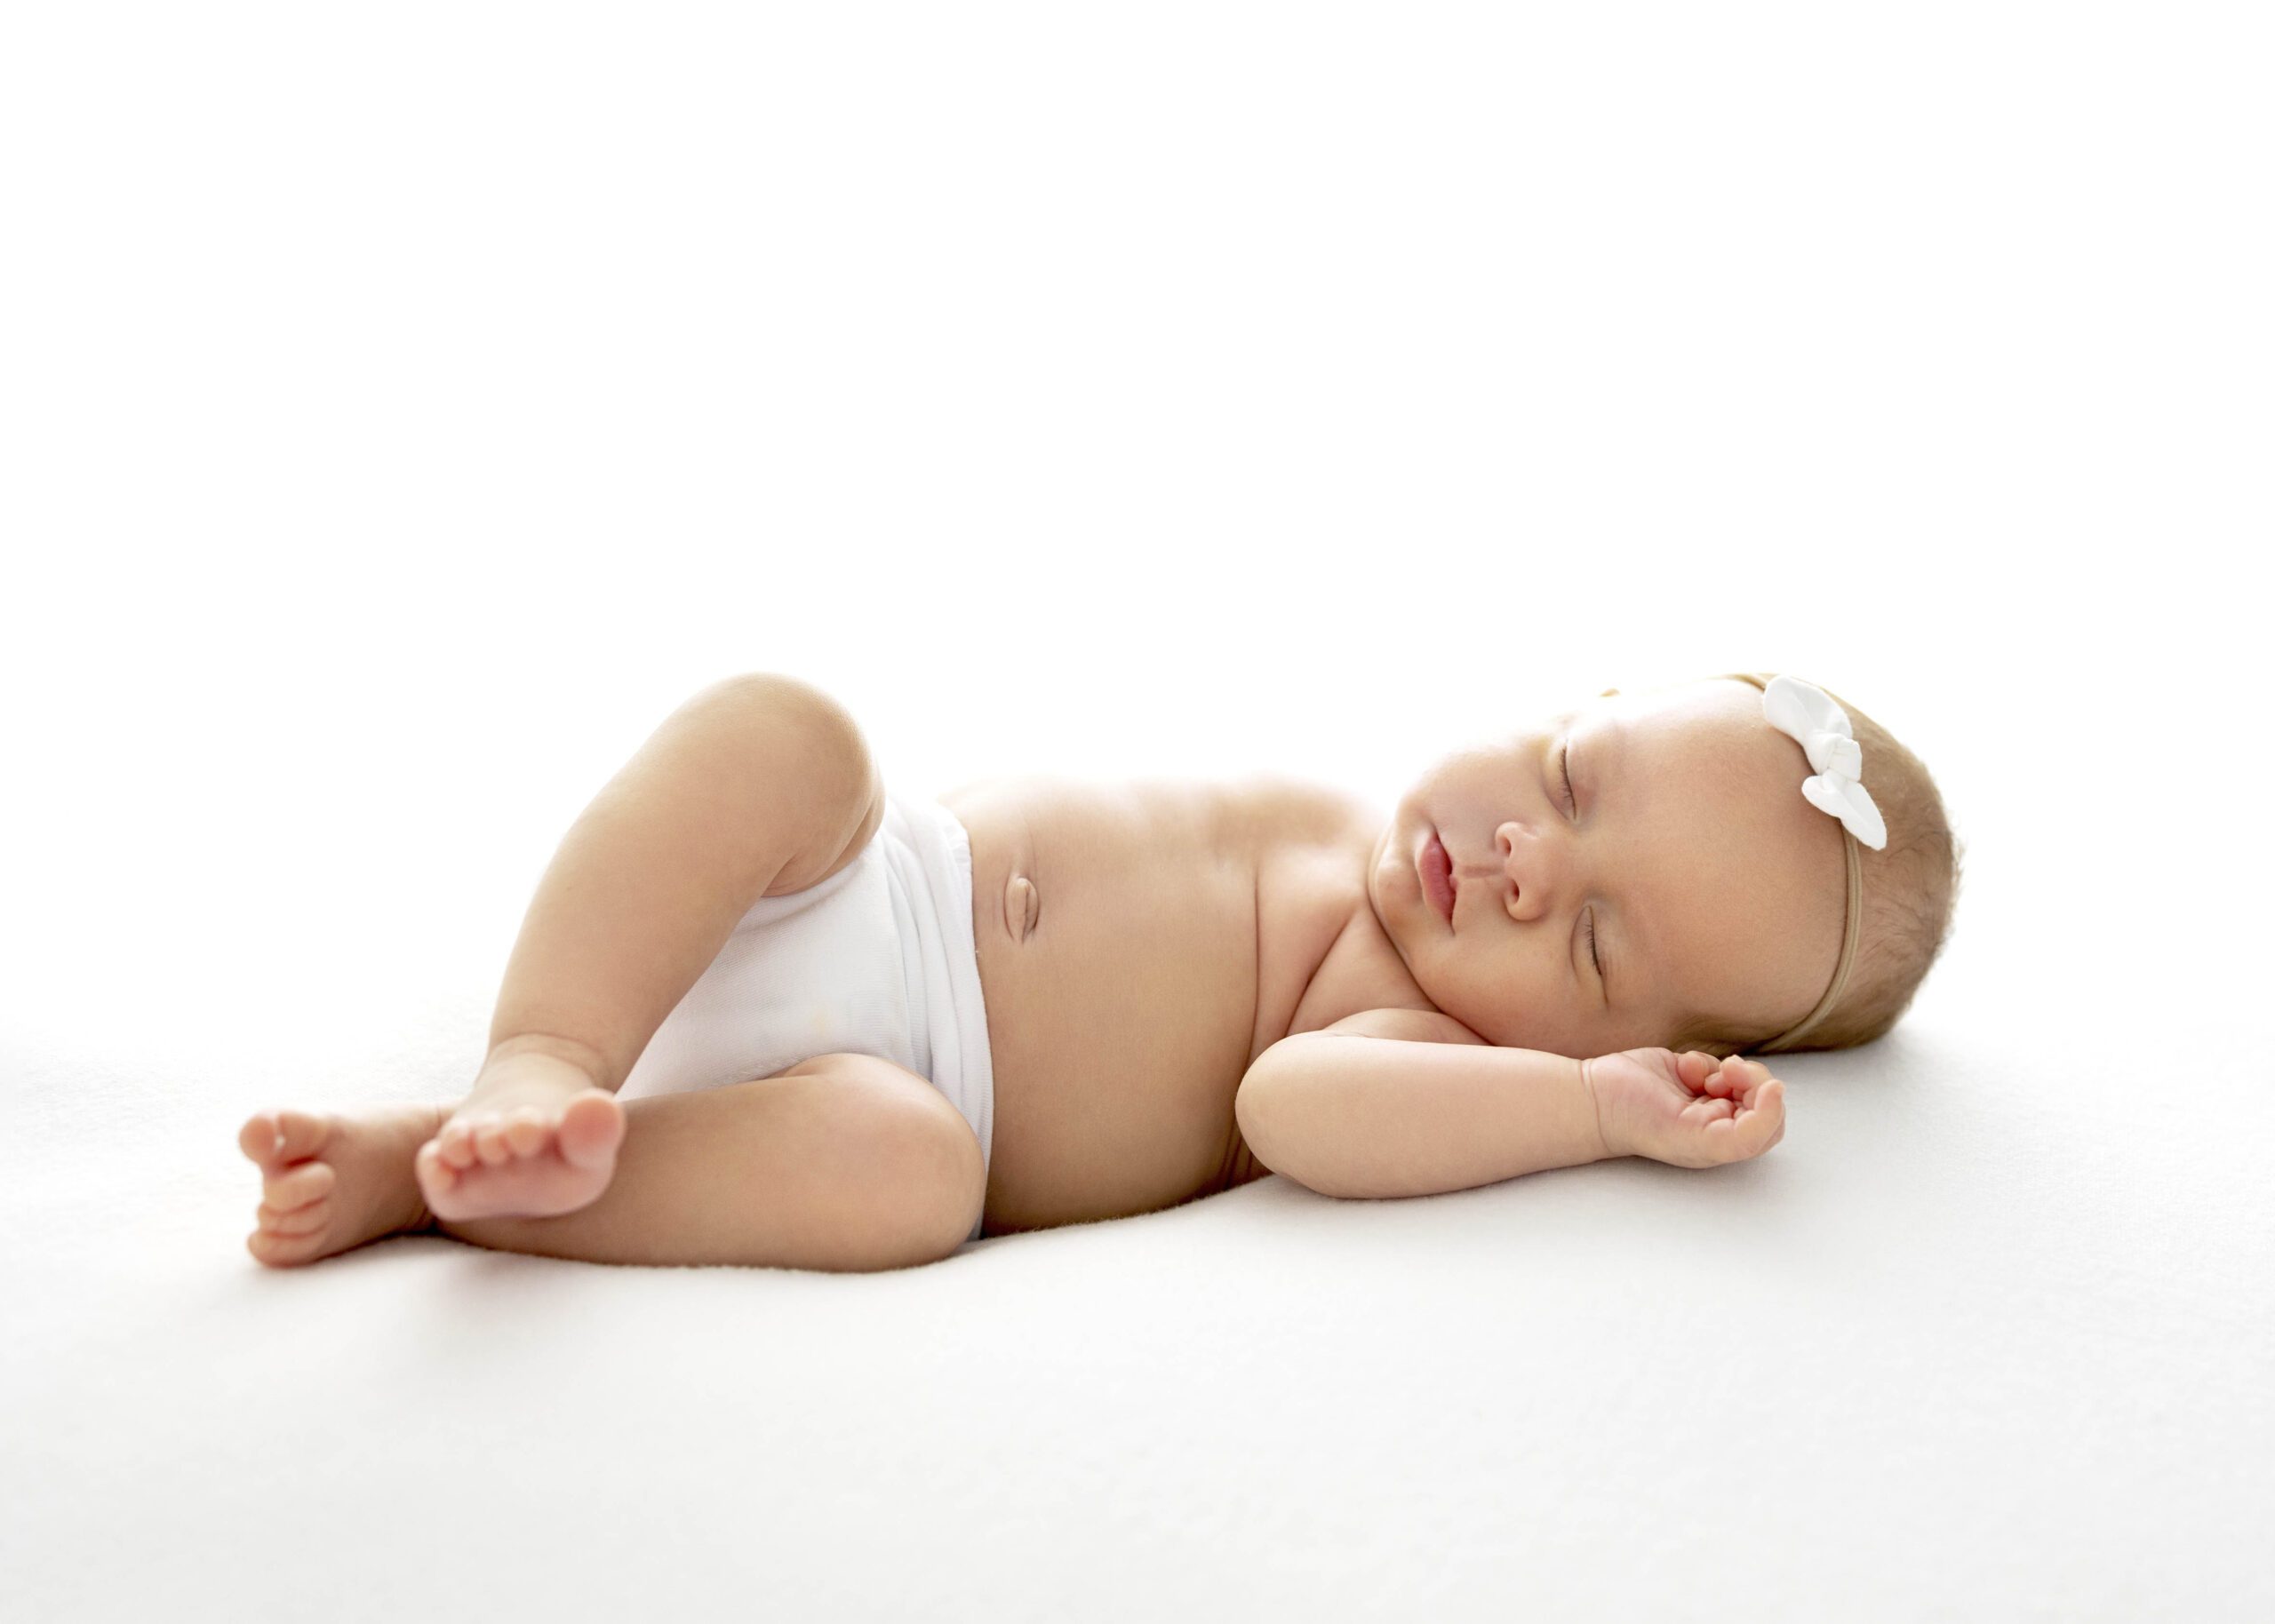 backlit newborn baby with white bow in hair by baby photographer Dallas